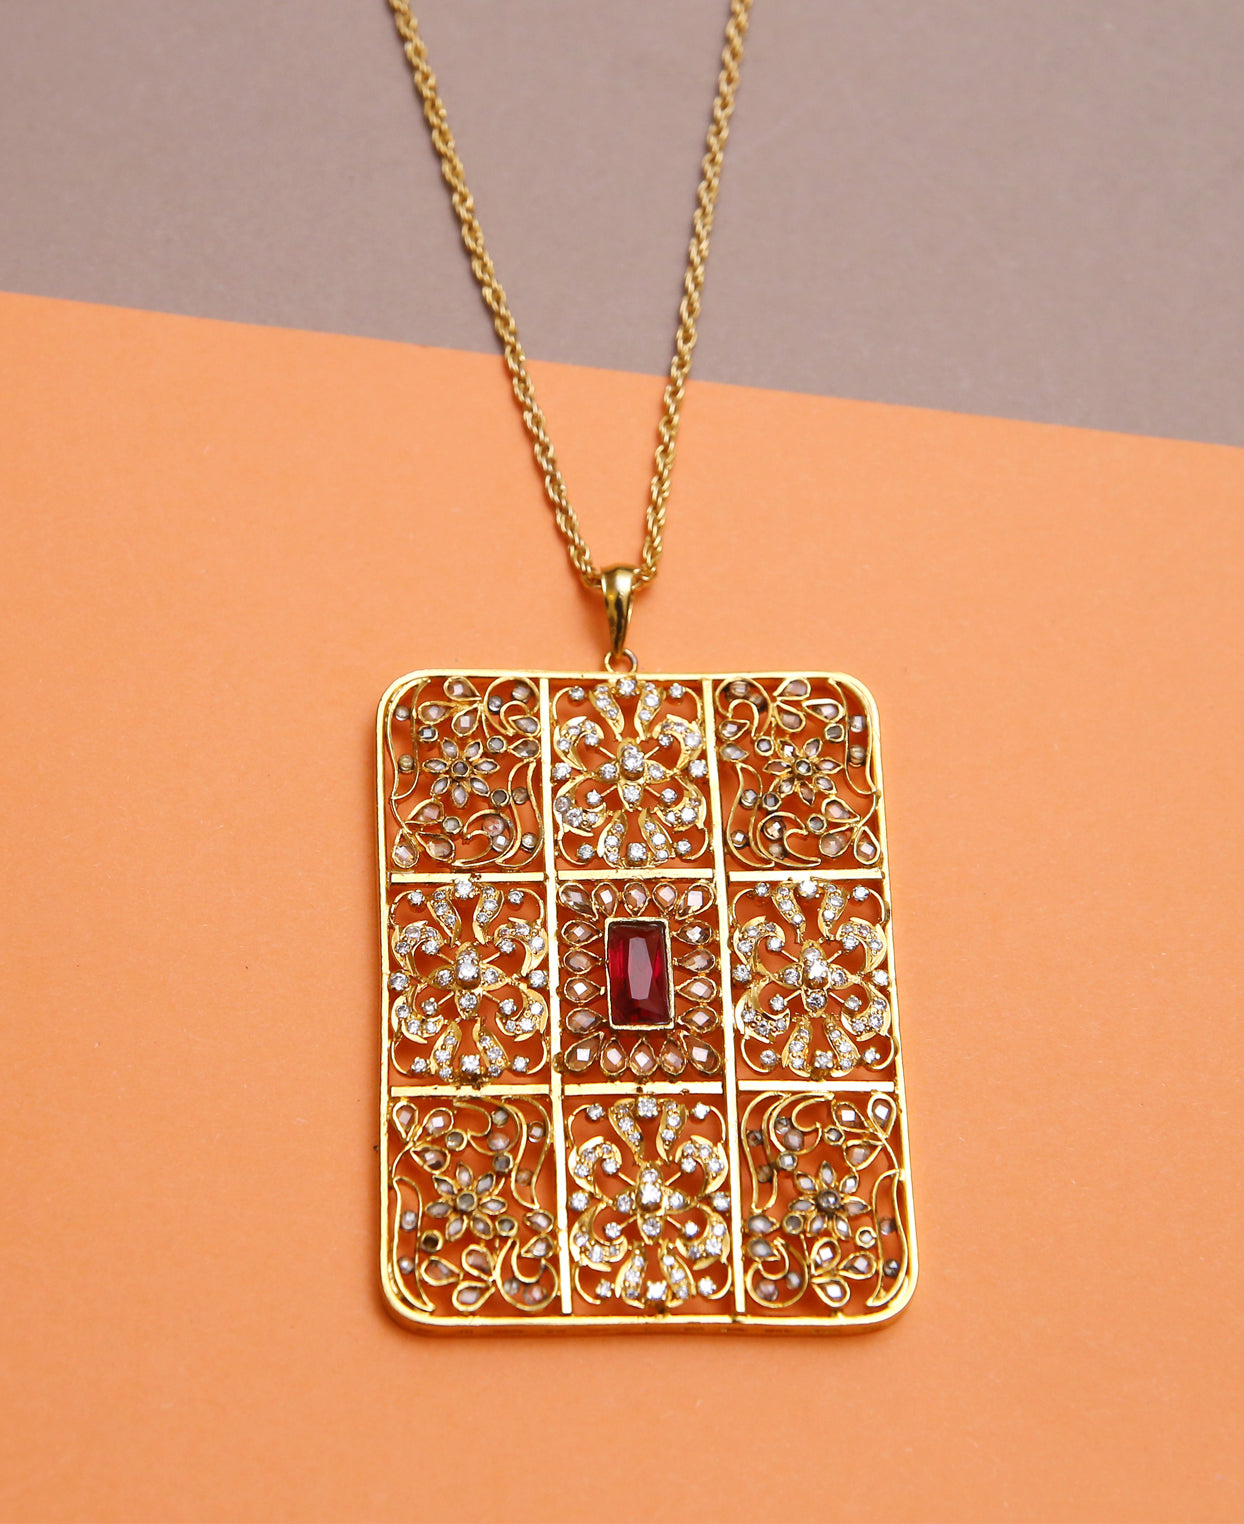 Handcrafted Box Pendant in Treated Rubies and Zircon